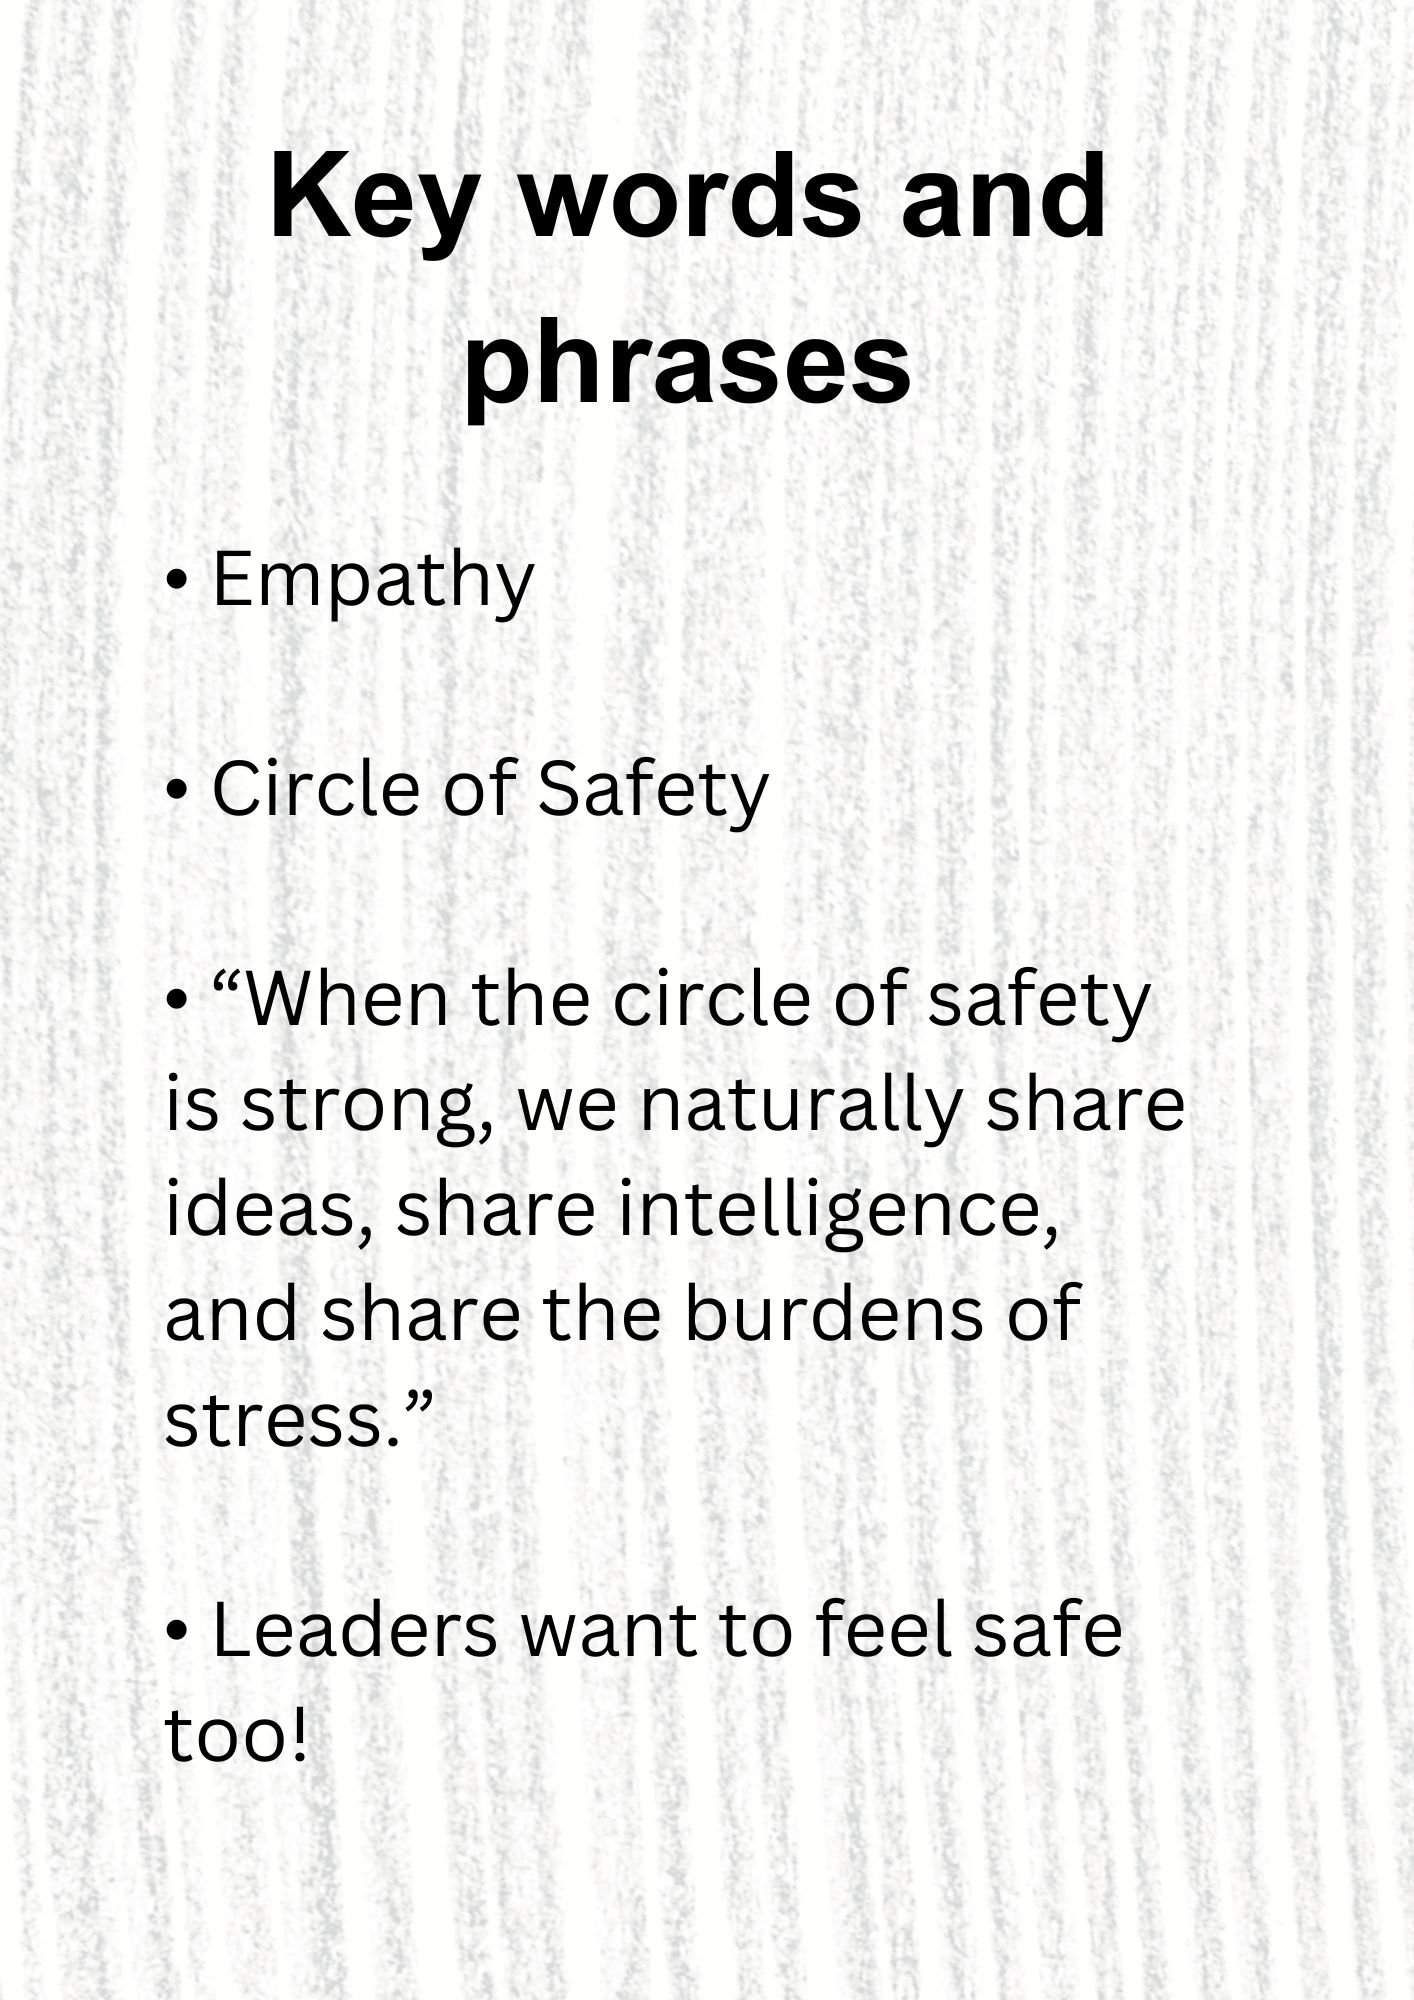 Key words: Empathy  Circle of Safety  When the circle of safety is strong, we naturally share ideas, share intelligence, and share the burdens of stress. Leaders want to feel safe too! 